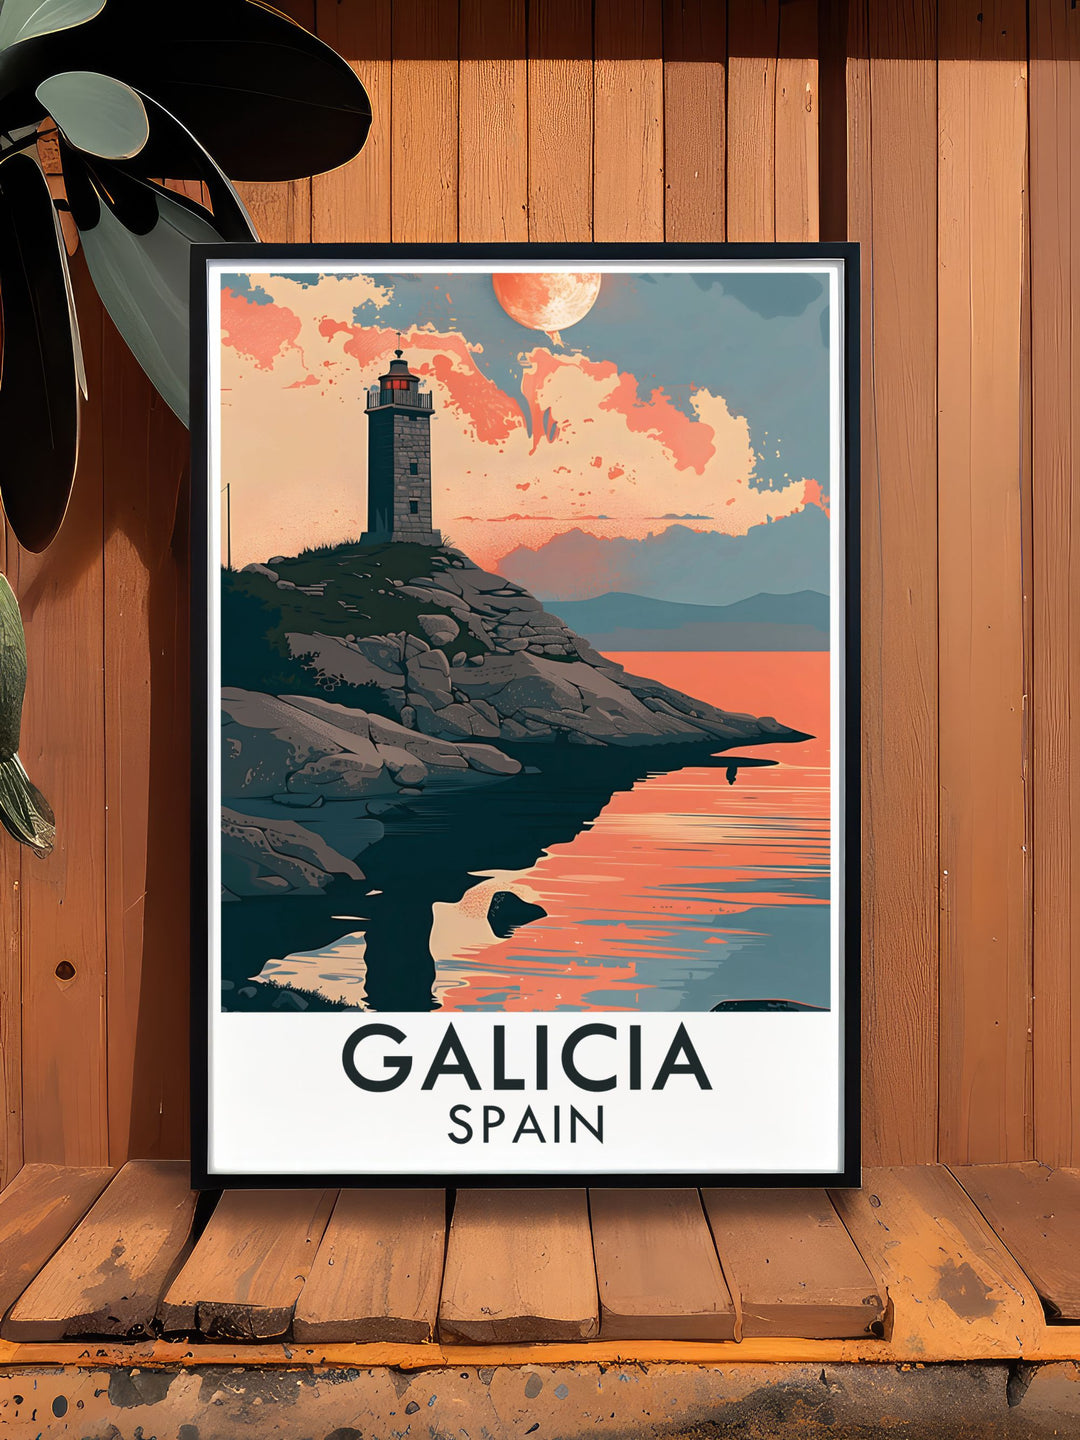 Celebrating the oldest Roman lighthouse still in use, this print highlights the Tower of Hercules architectural and historical significance.